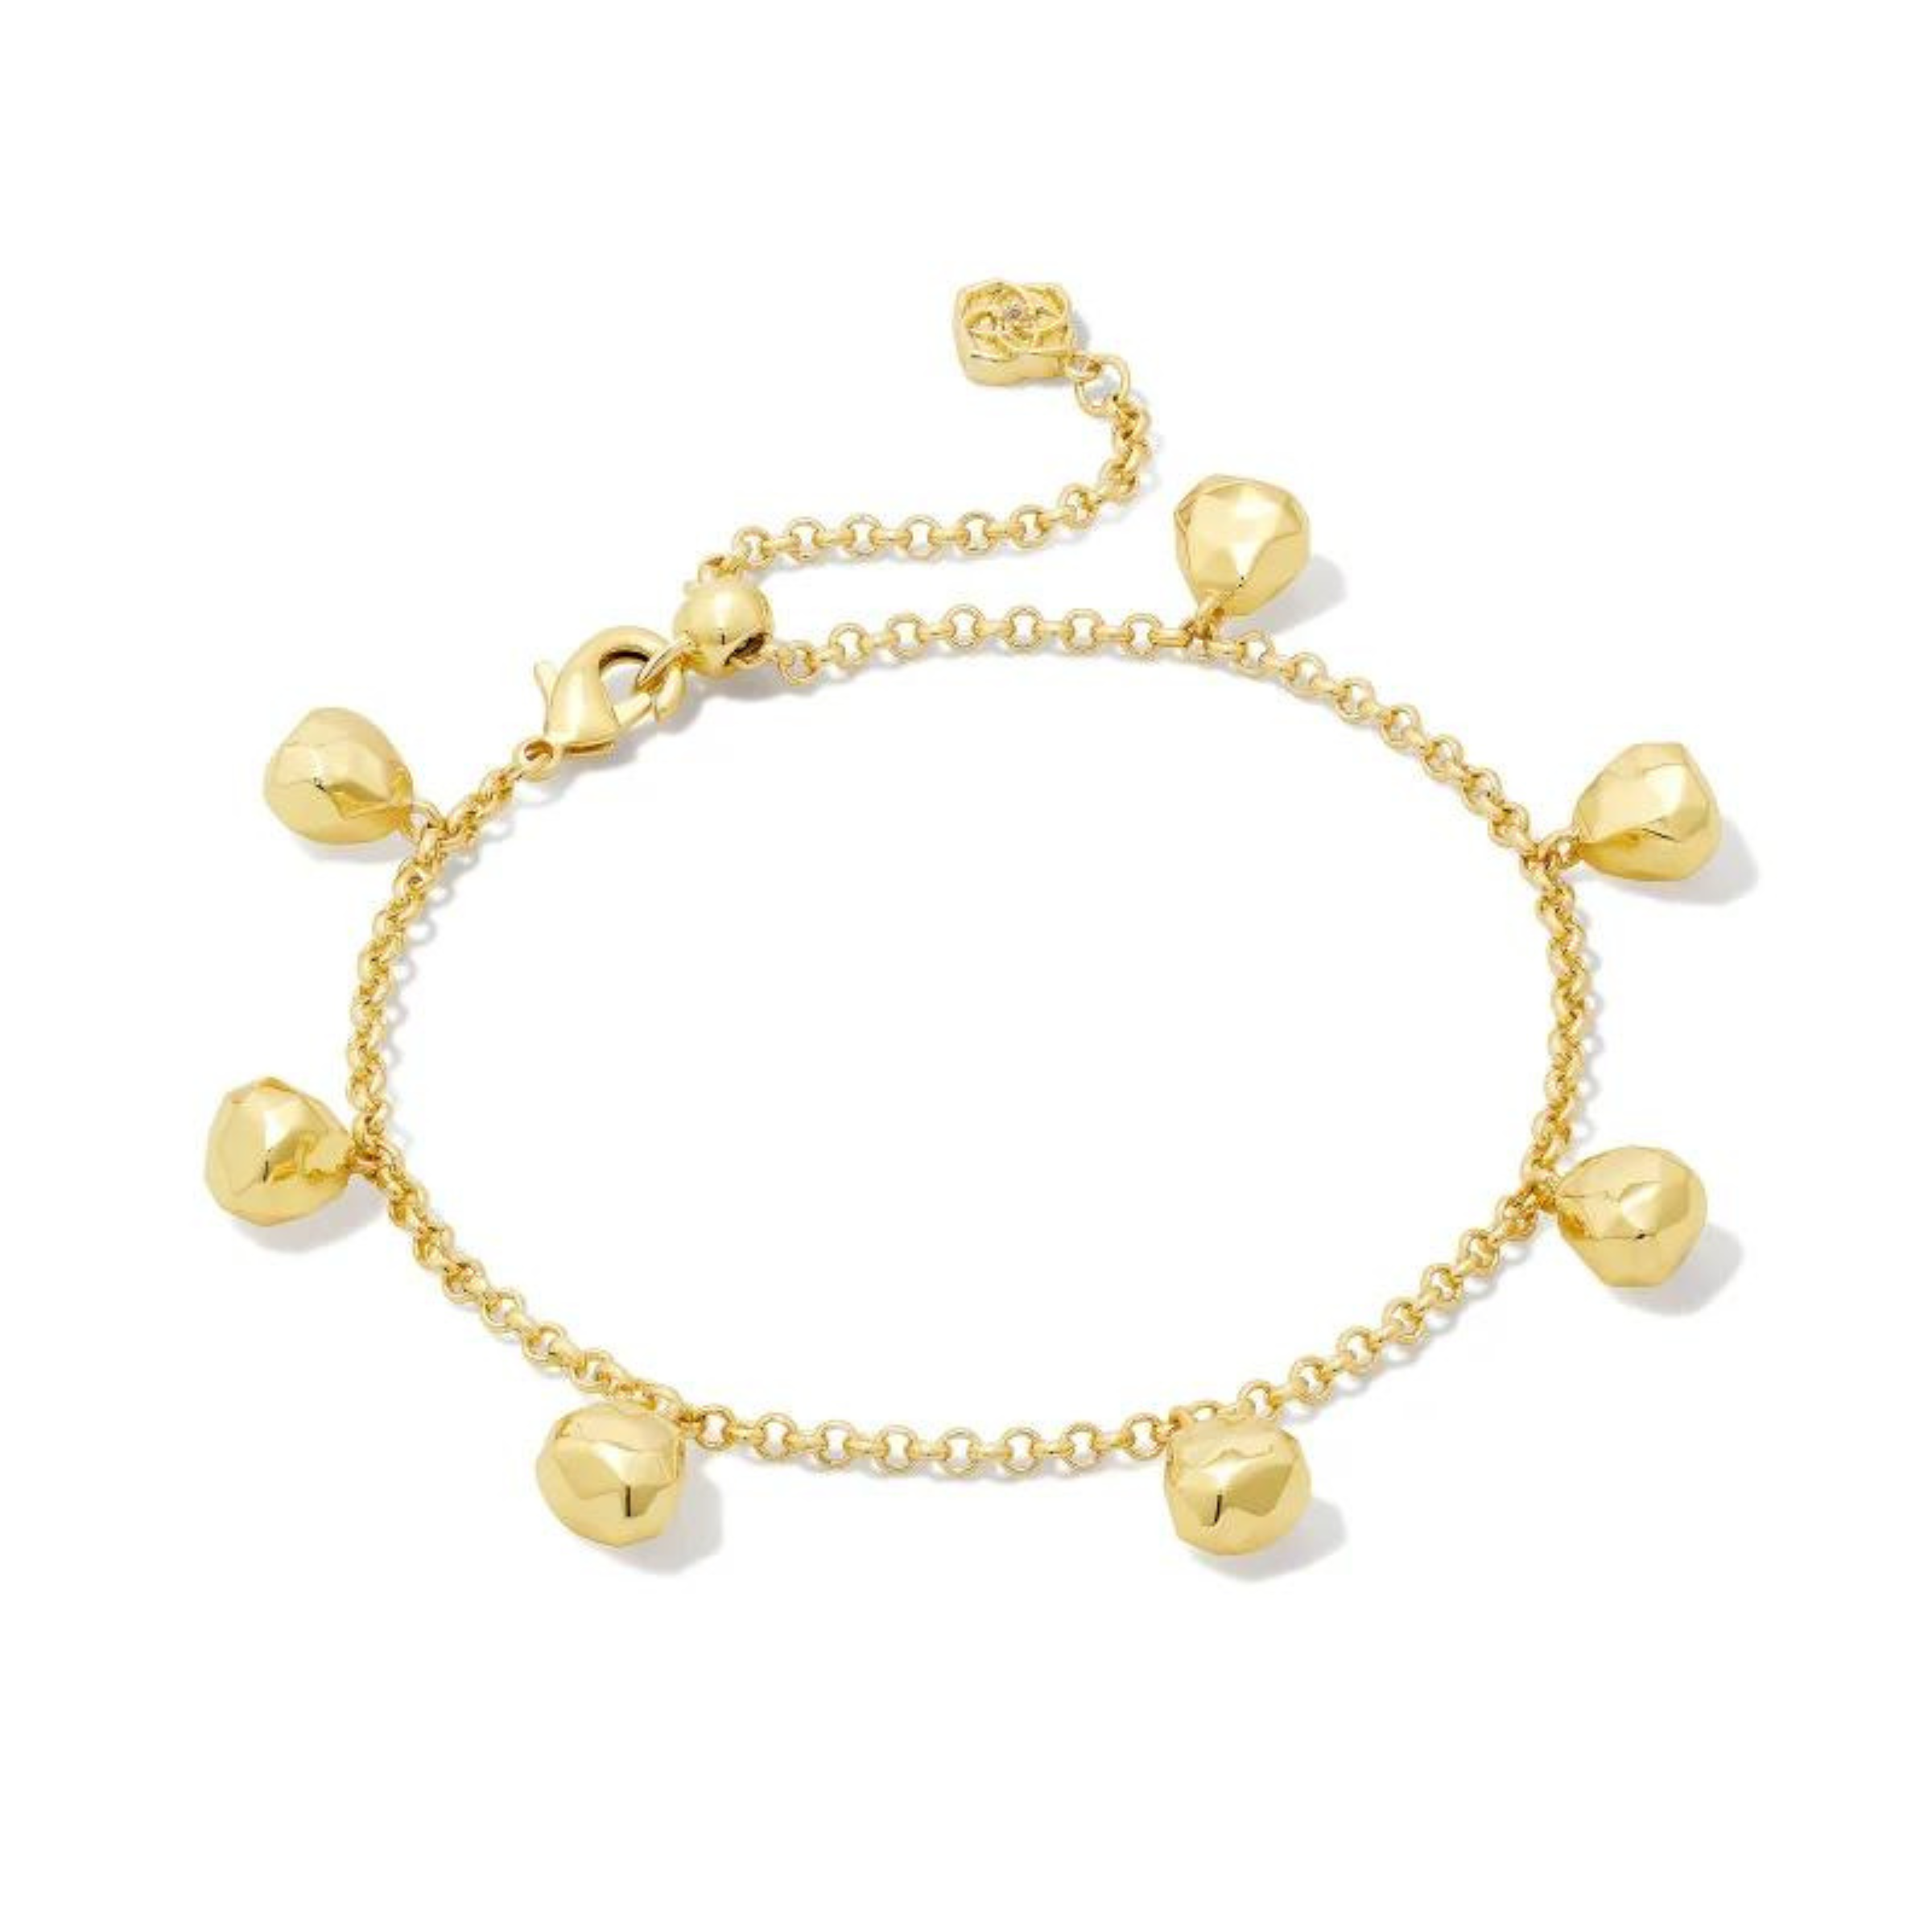 Gold chain bracelet with gold bead charms hanging off of the bracelet. This necklace is pictured on a white background. 